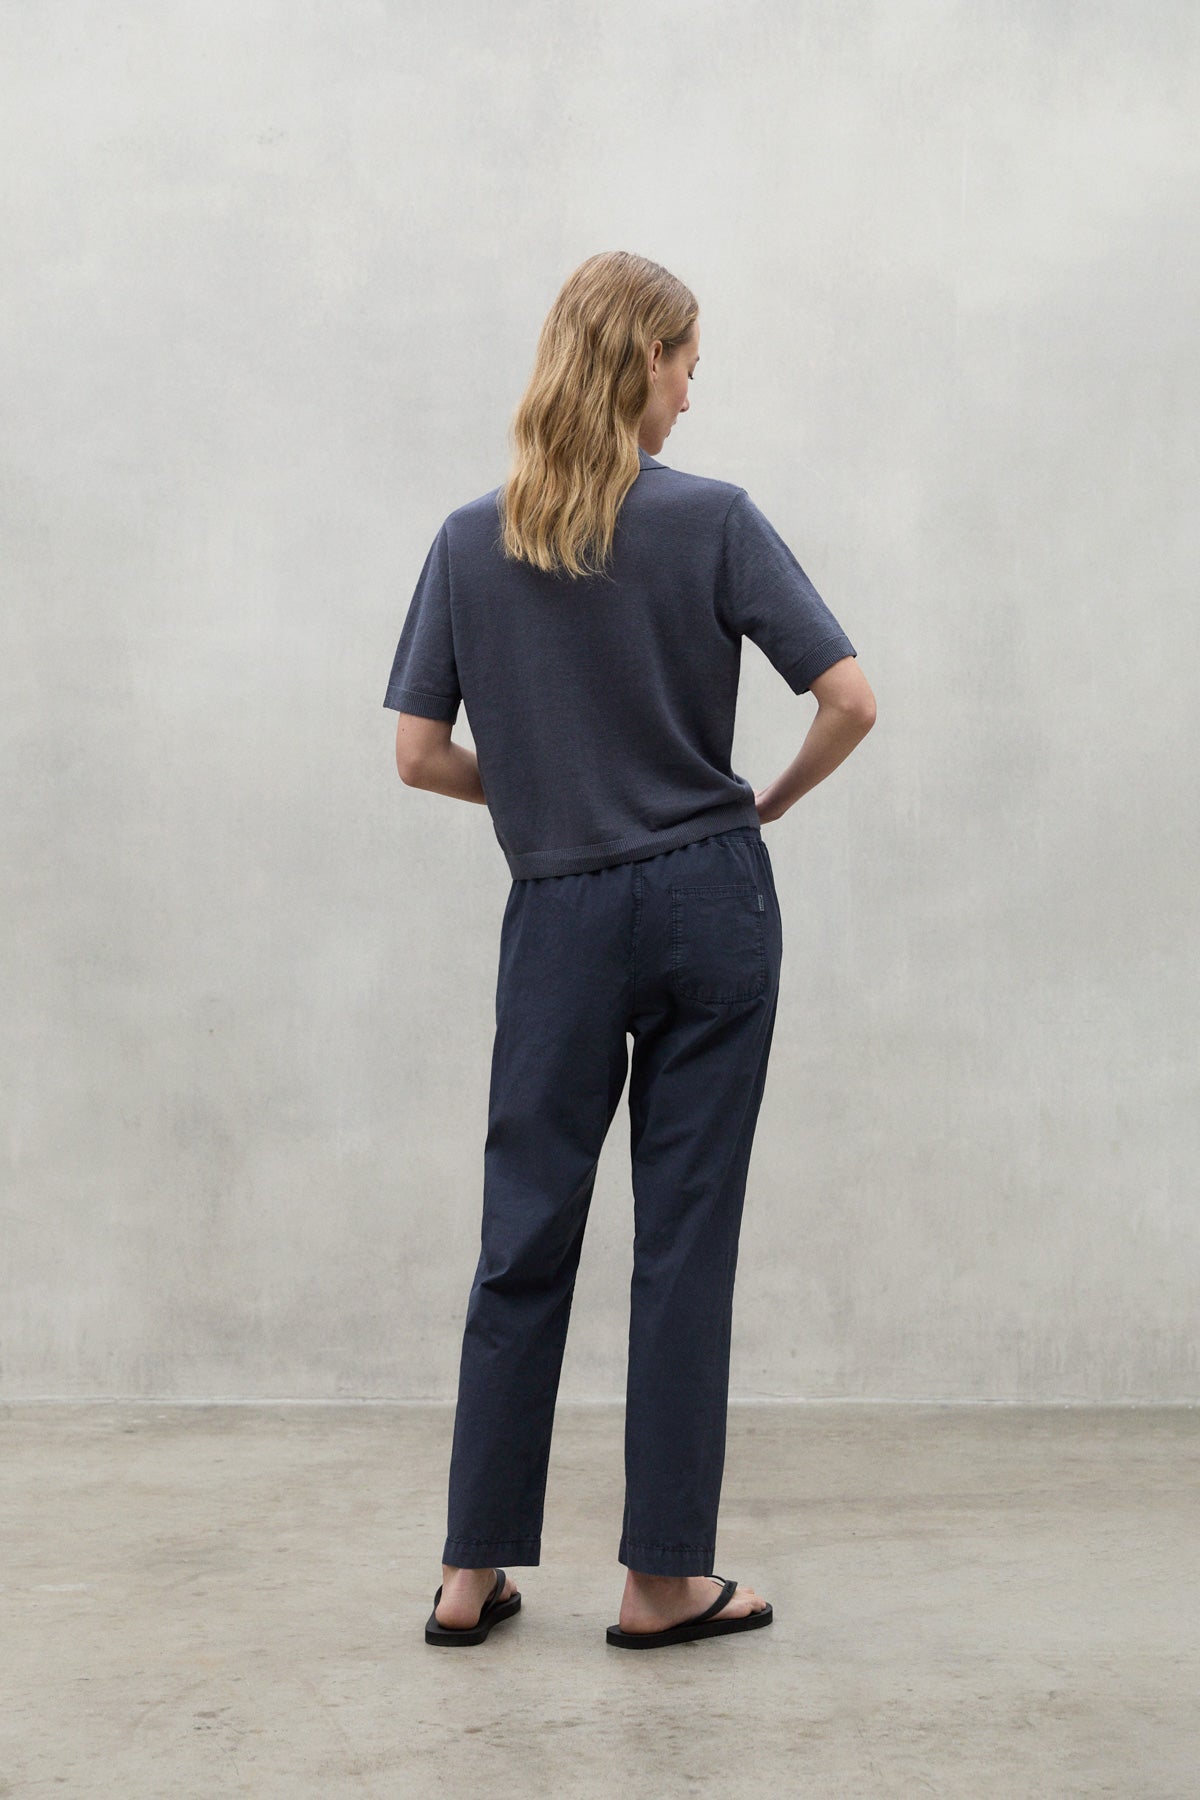 NAVY BLUE GANGES TROUSERS